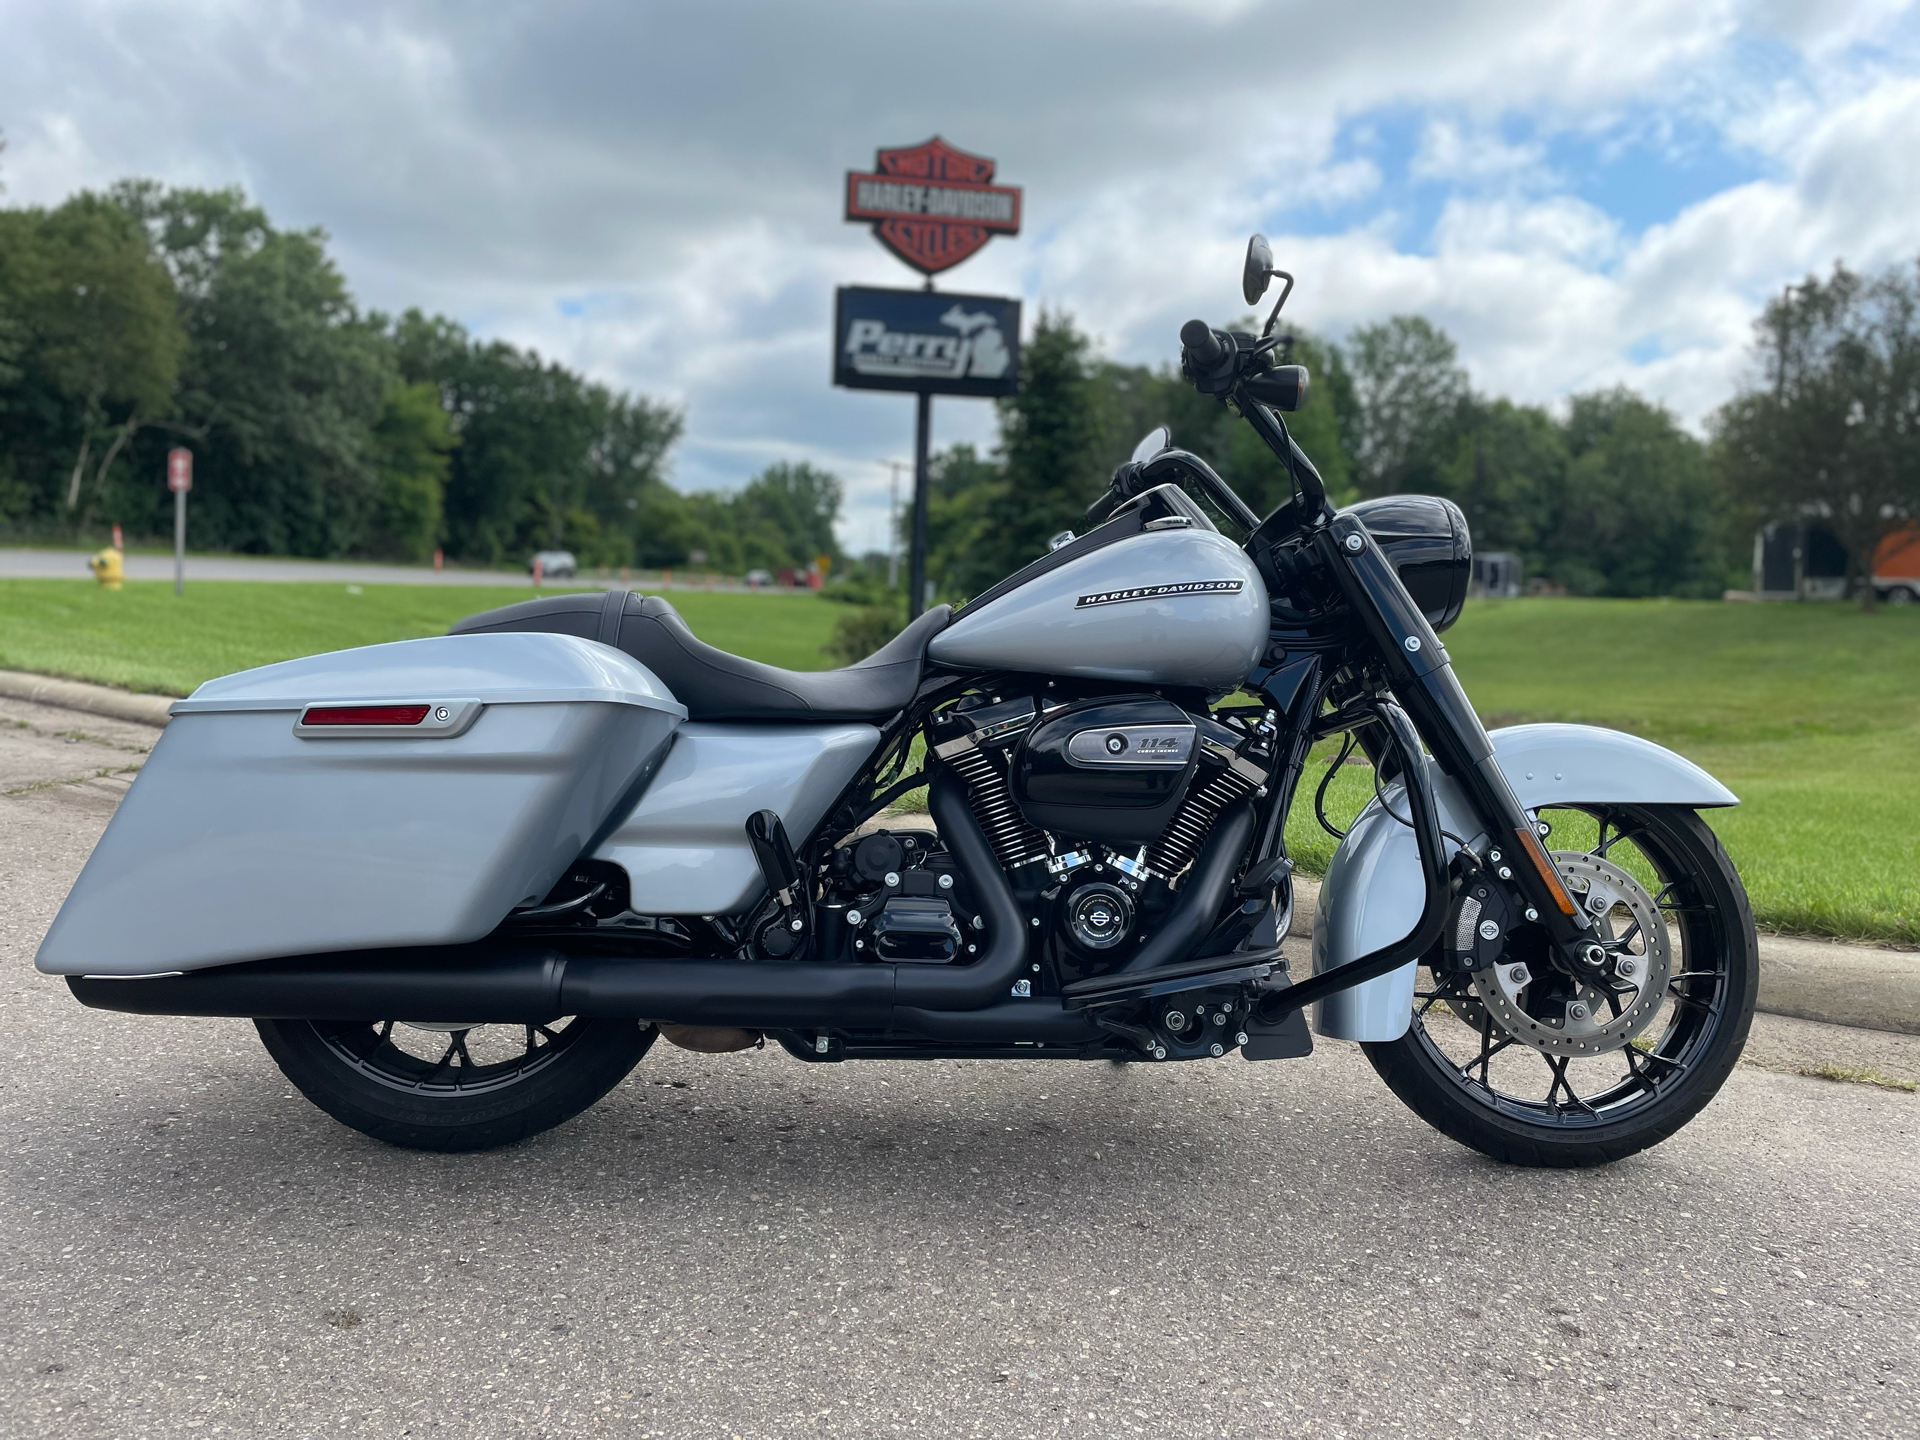 Certified Pre Owned 2020 Harley Davidson Road King Special Motorcycles In Portage Mi 641806 Barracuda Silver